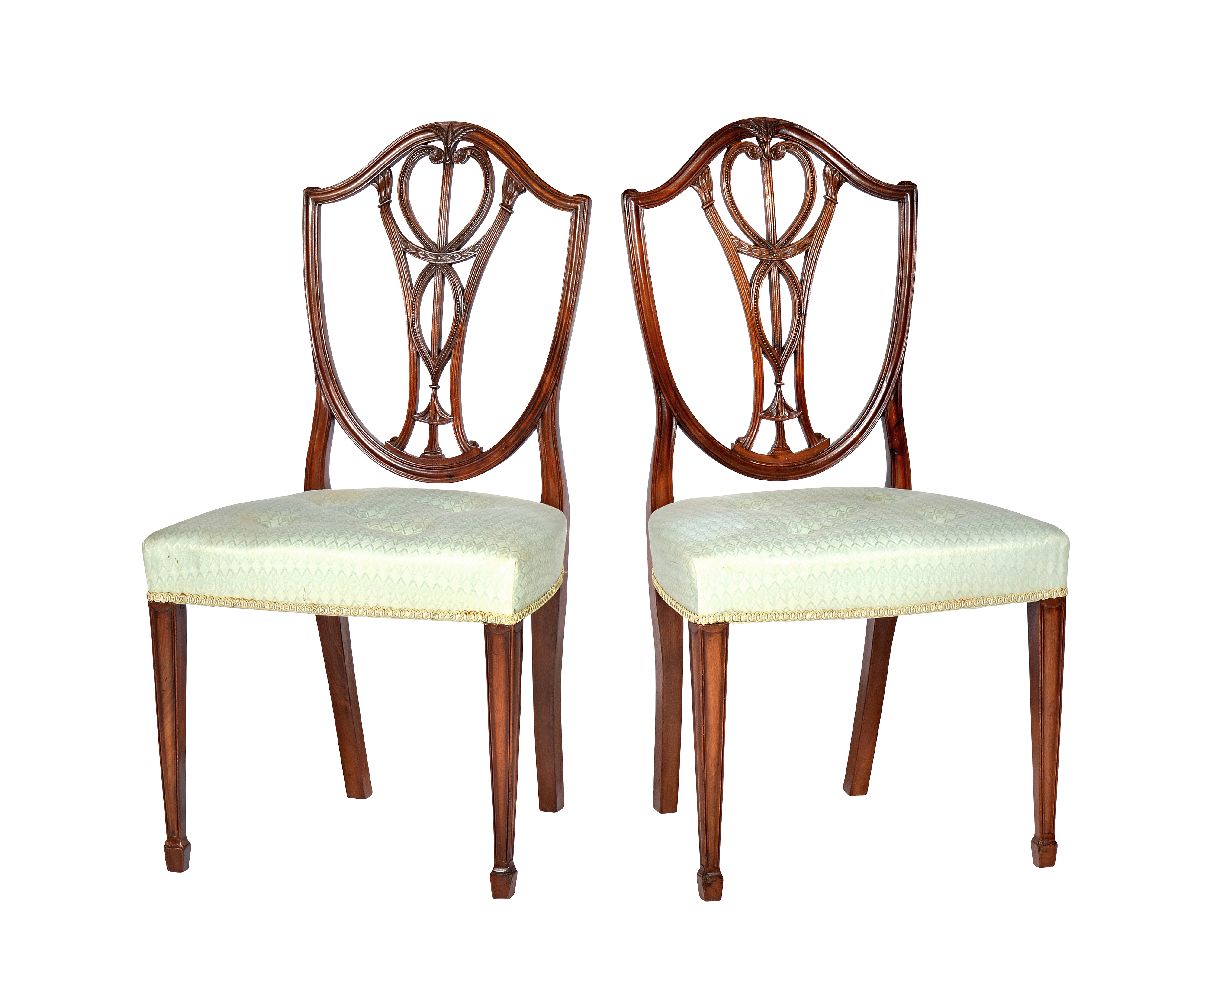 A set of eight mahogany shield back dining chairs in George III style